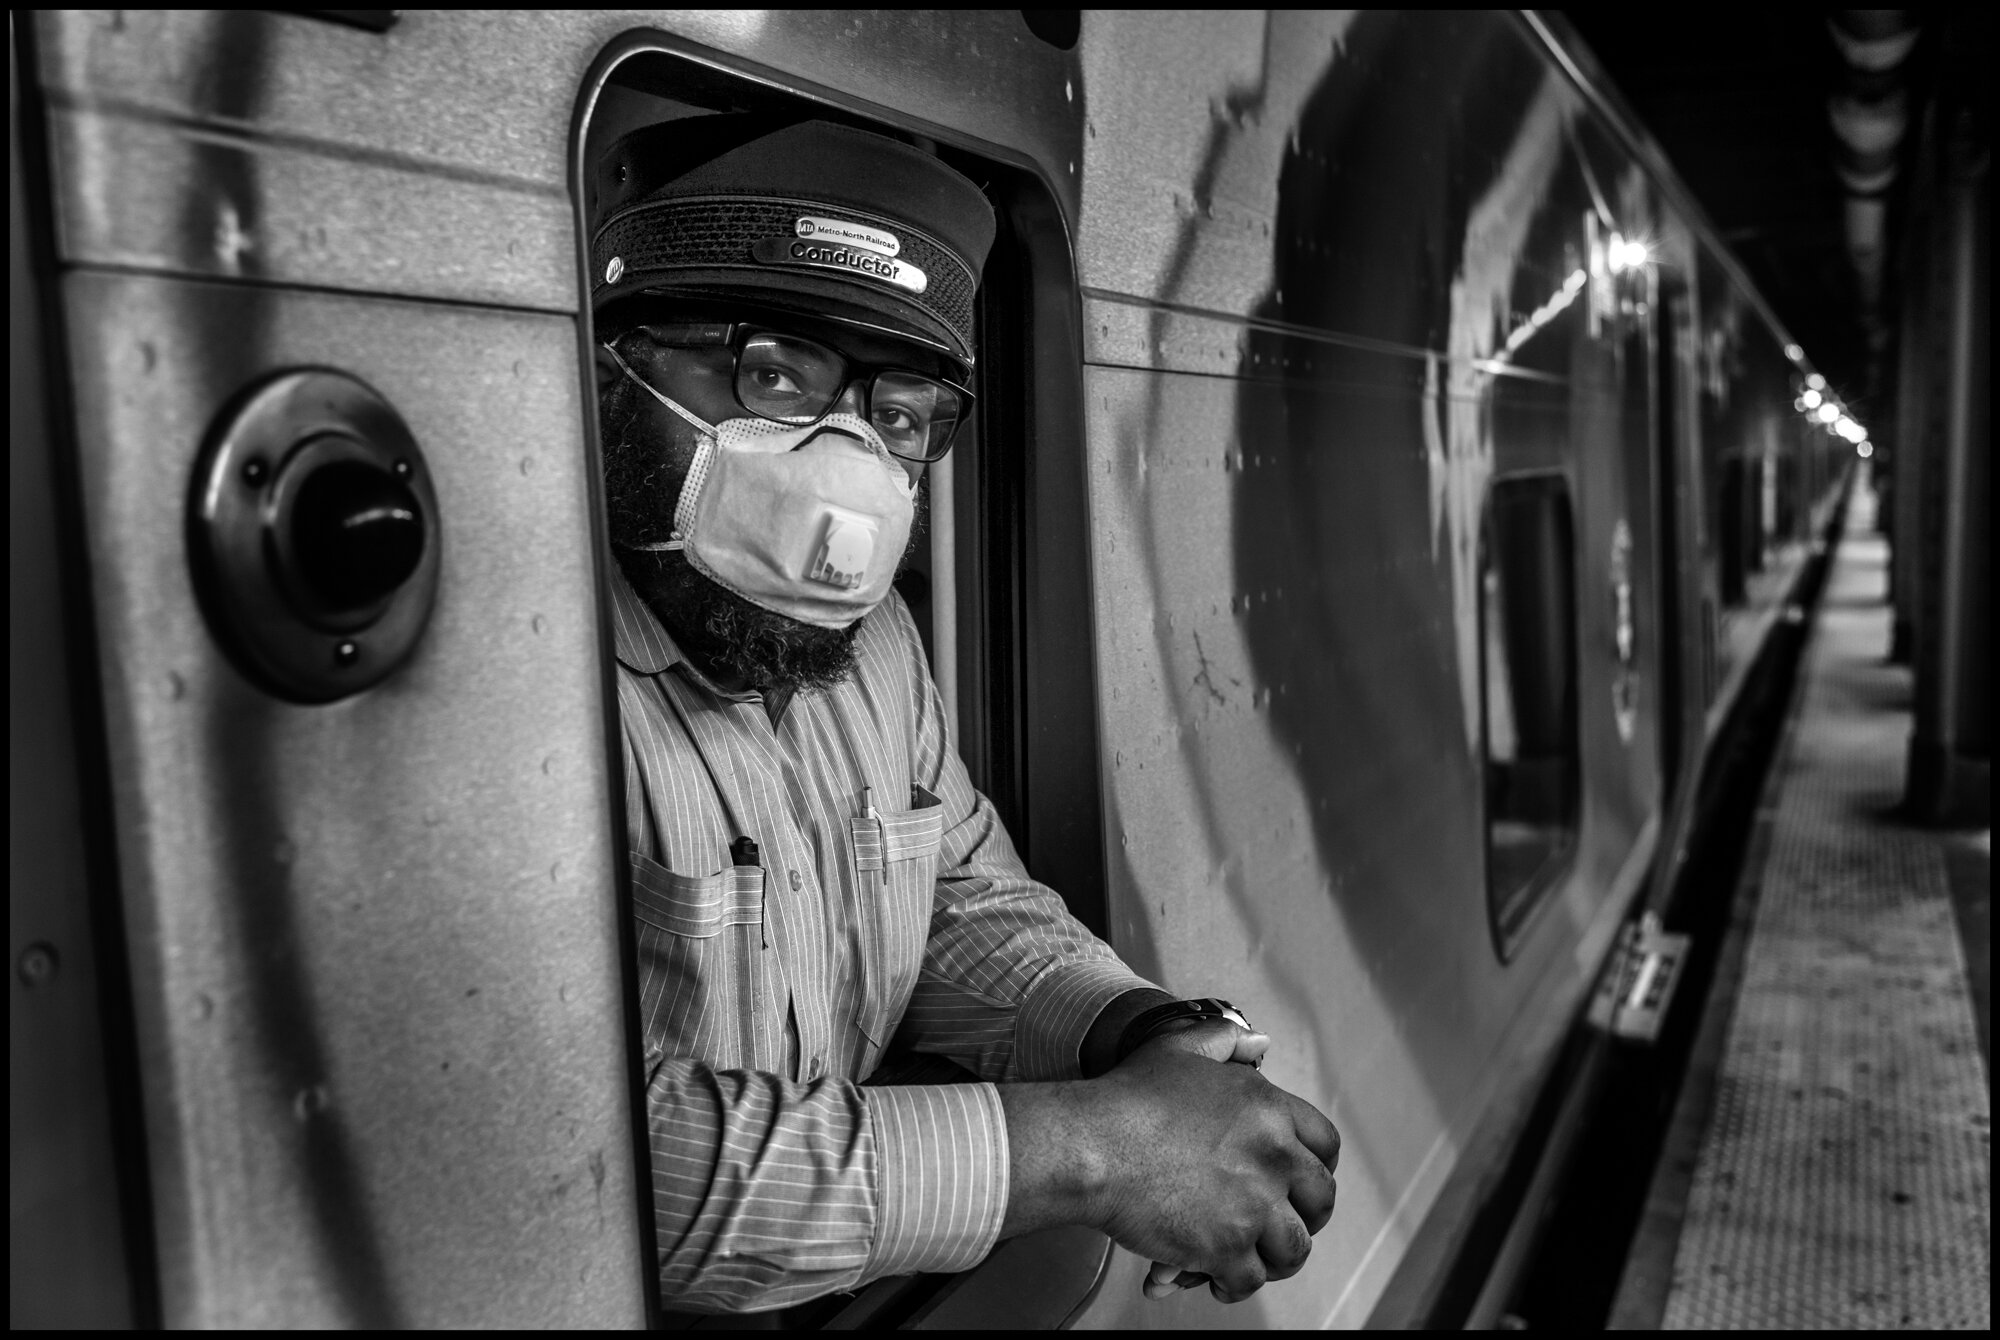  Alex, a train conductor who works for Metro North.   April 18, 2020. © Peter Turnley  ID# 25-007 